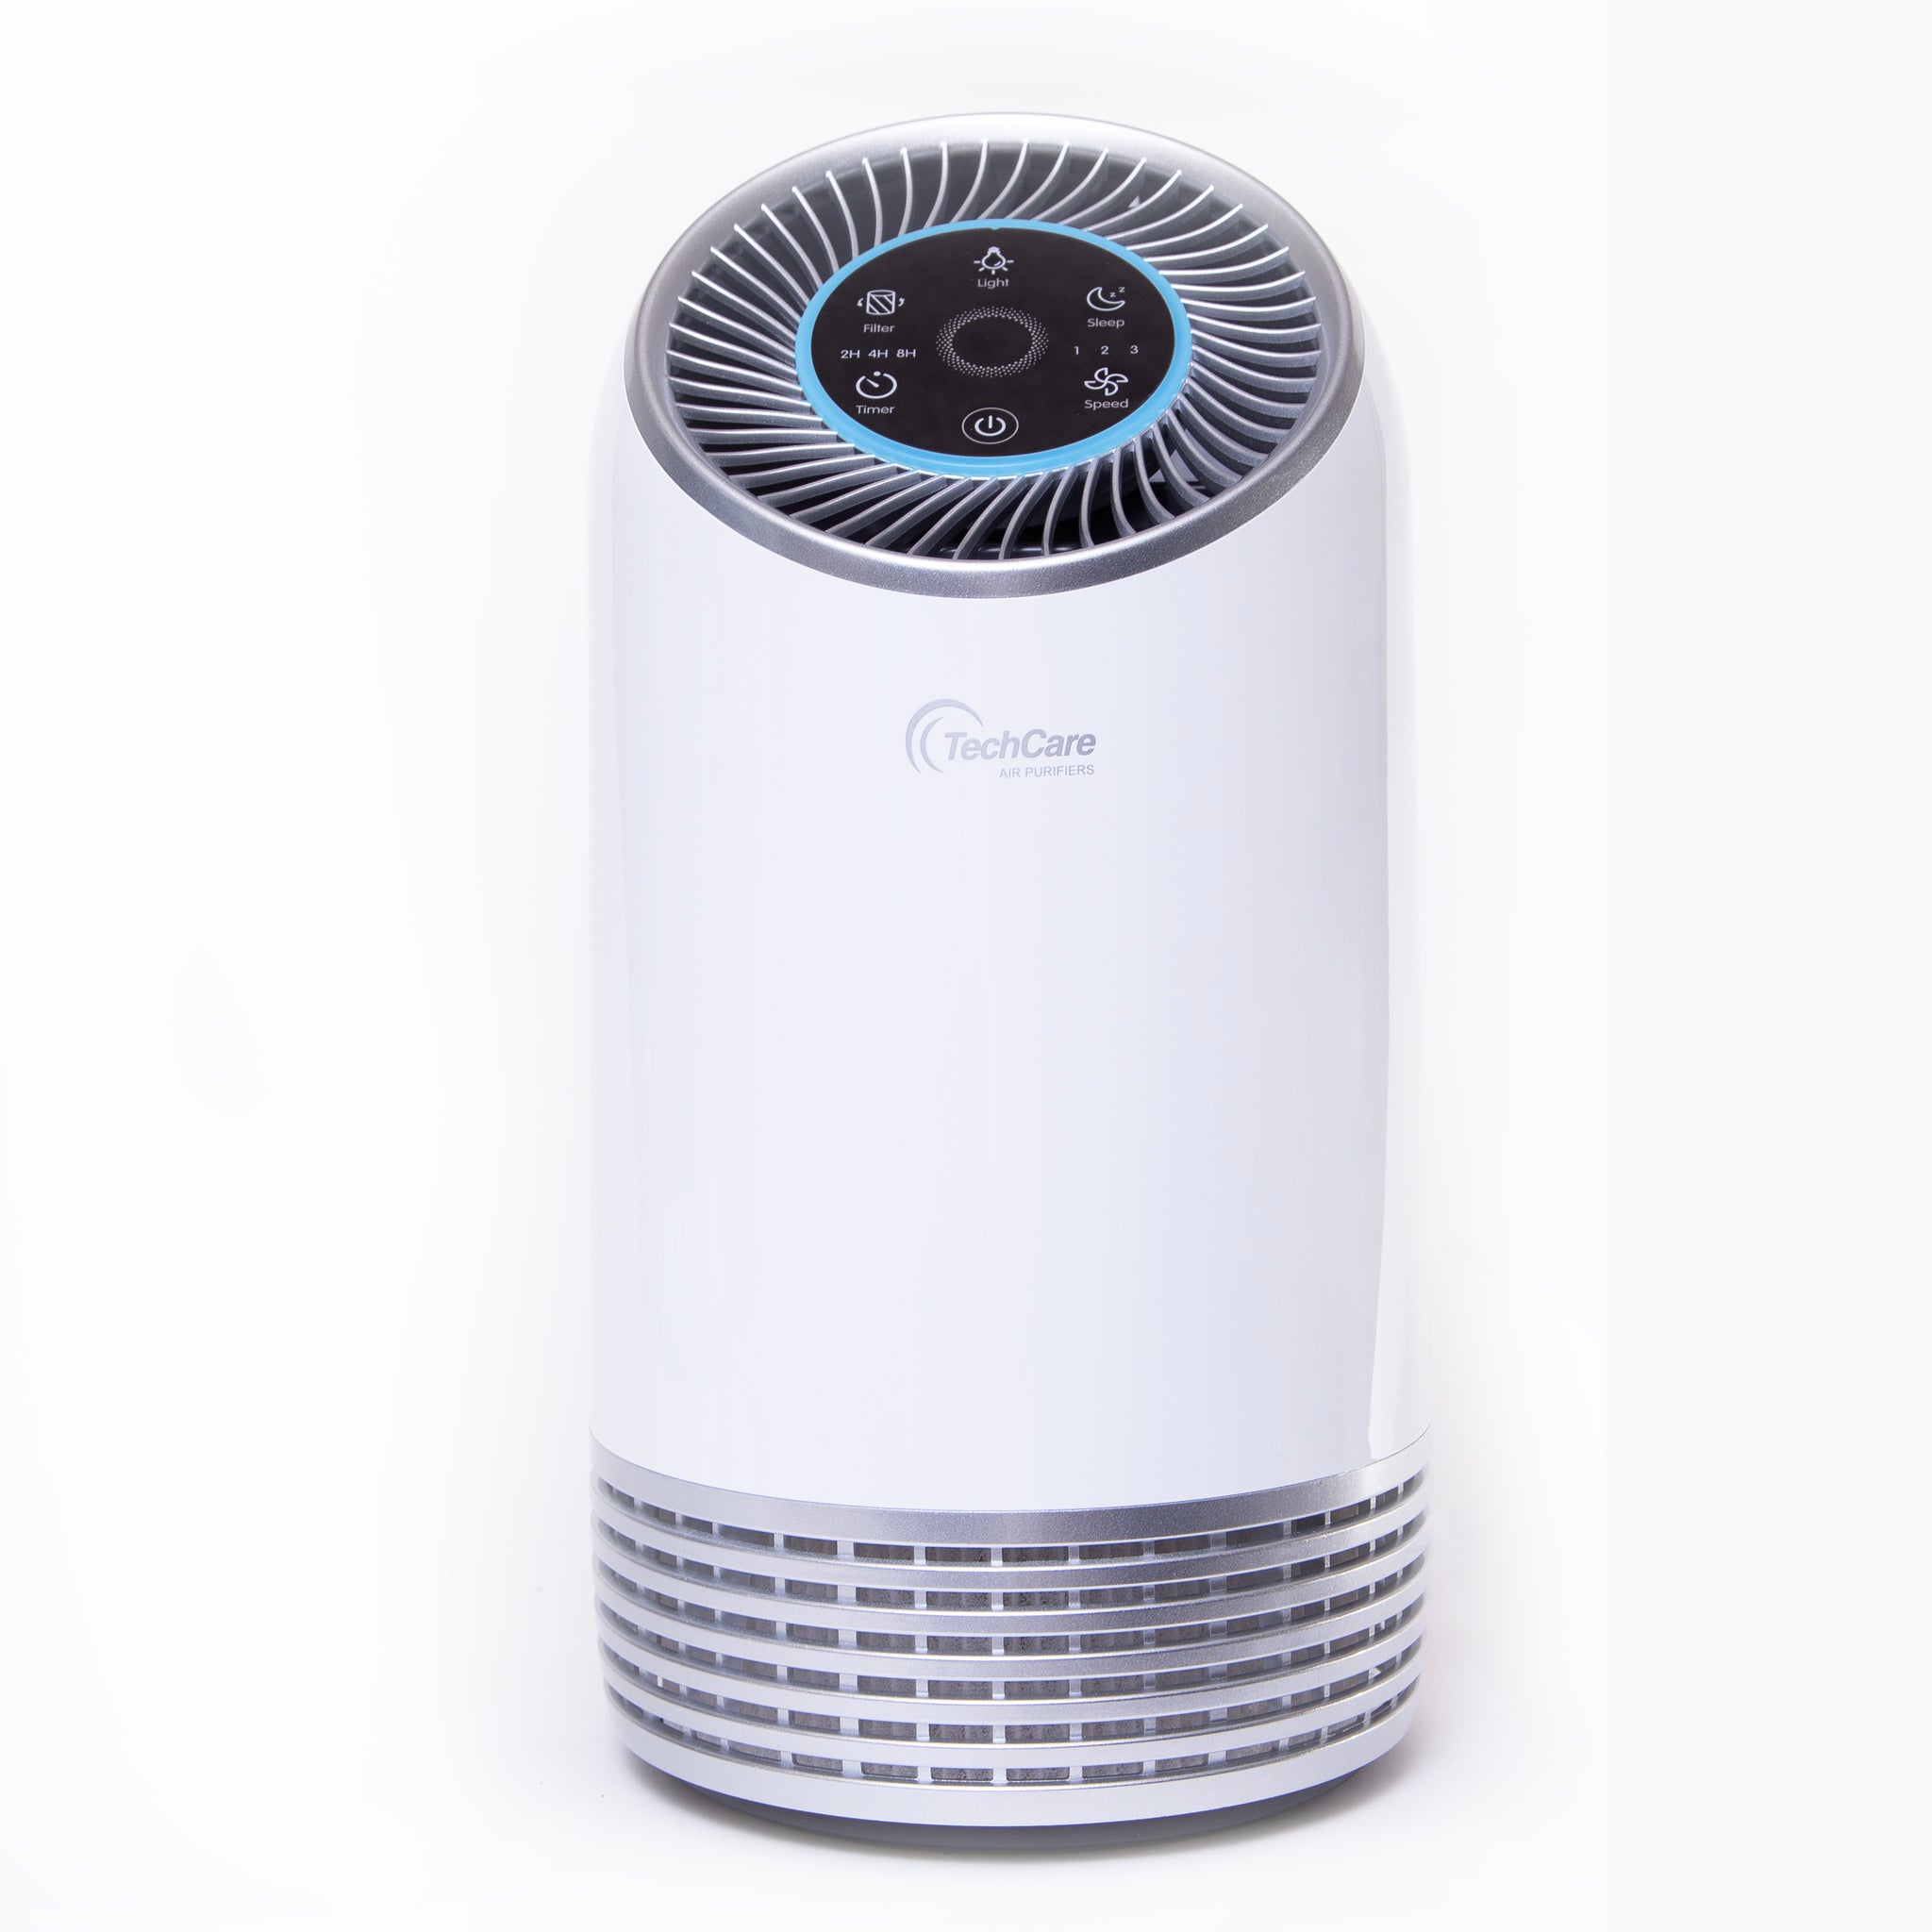 A beginner’s guide to buying the right Air Purifier